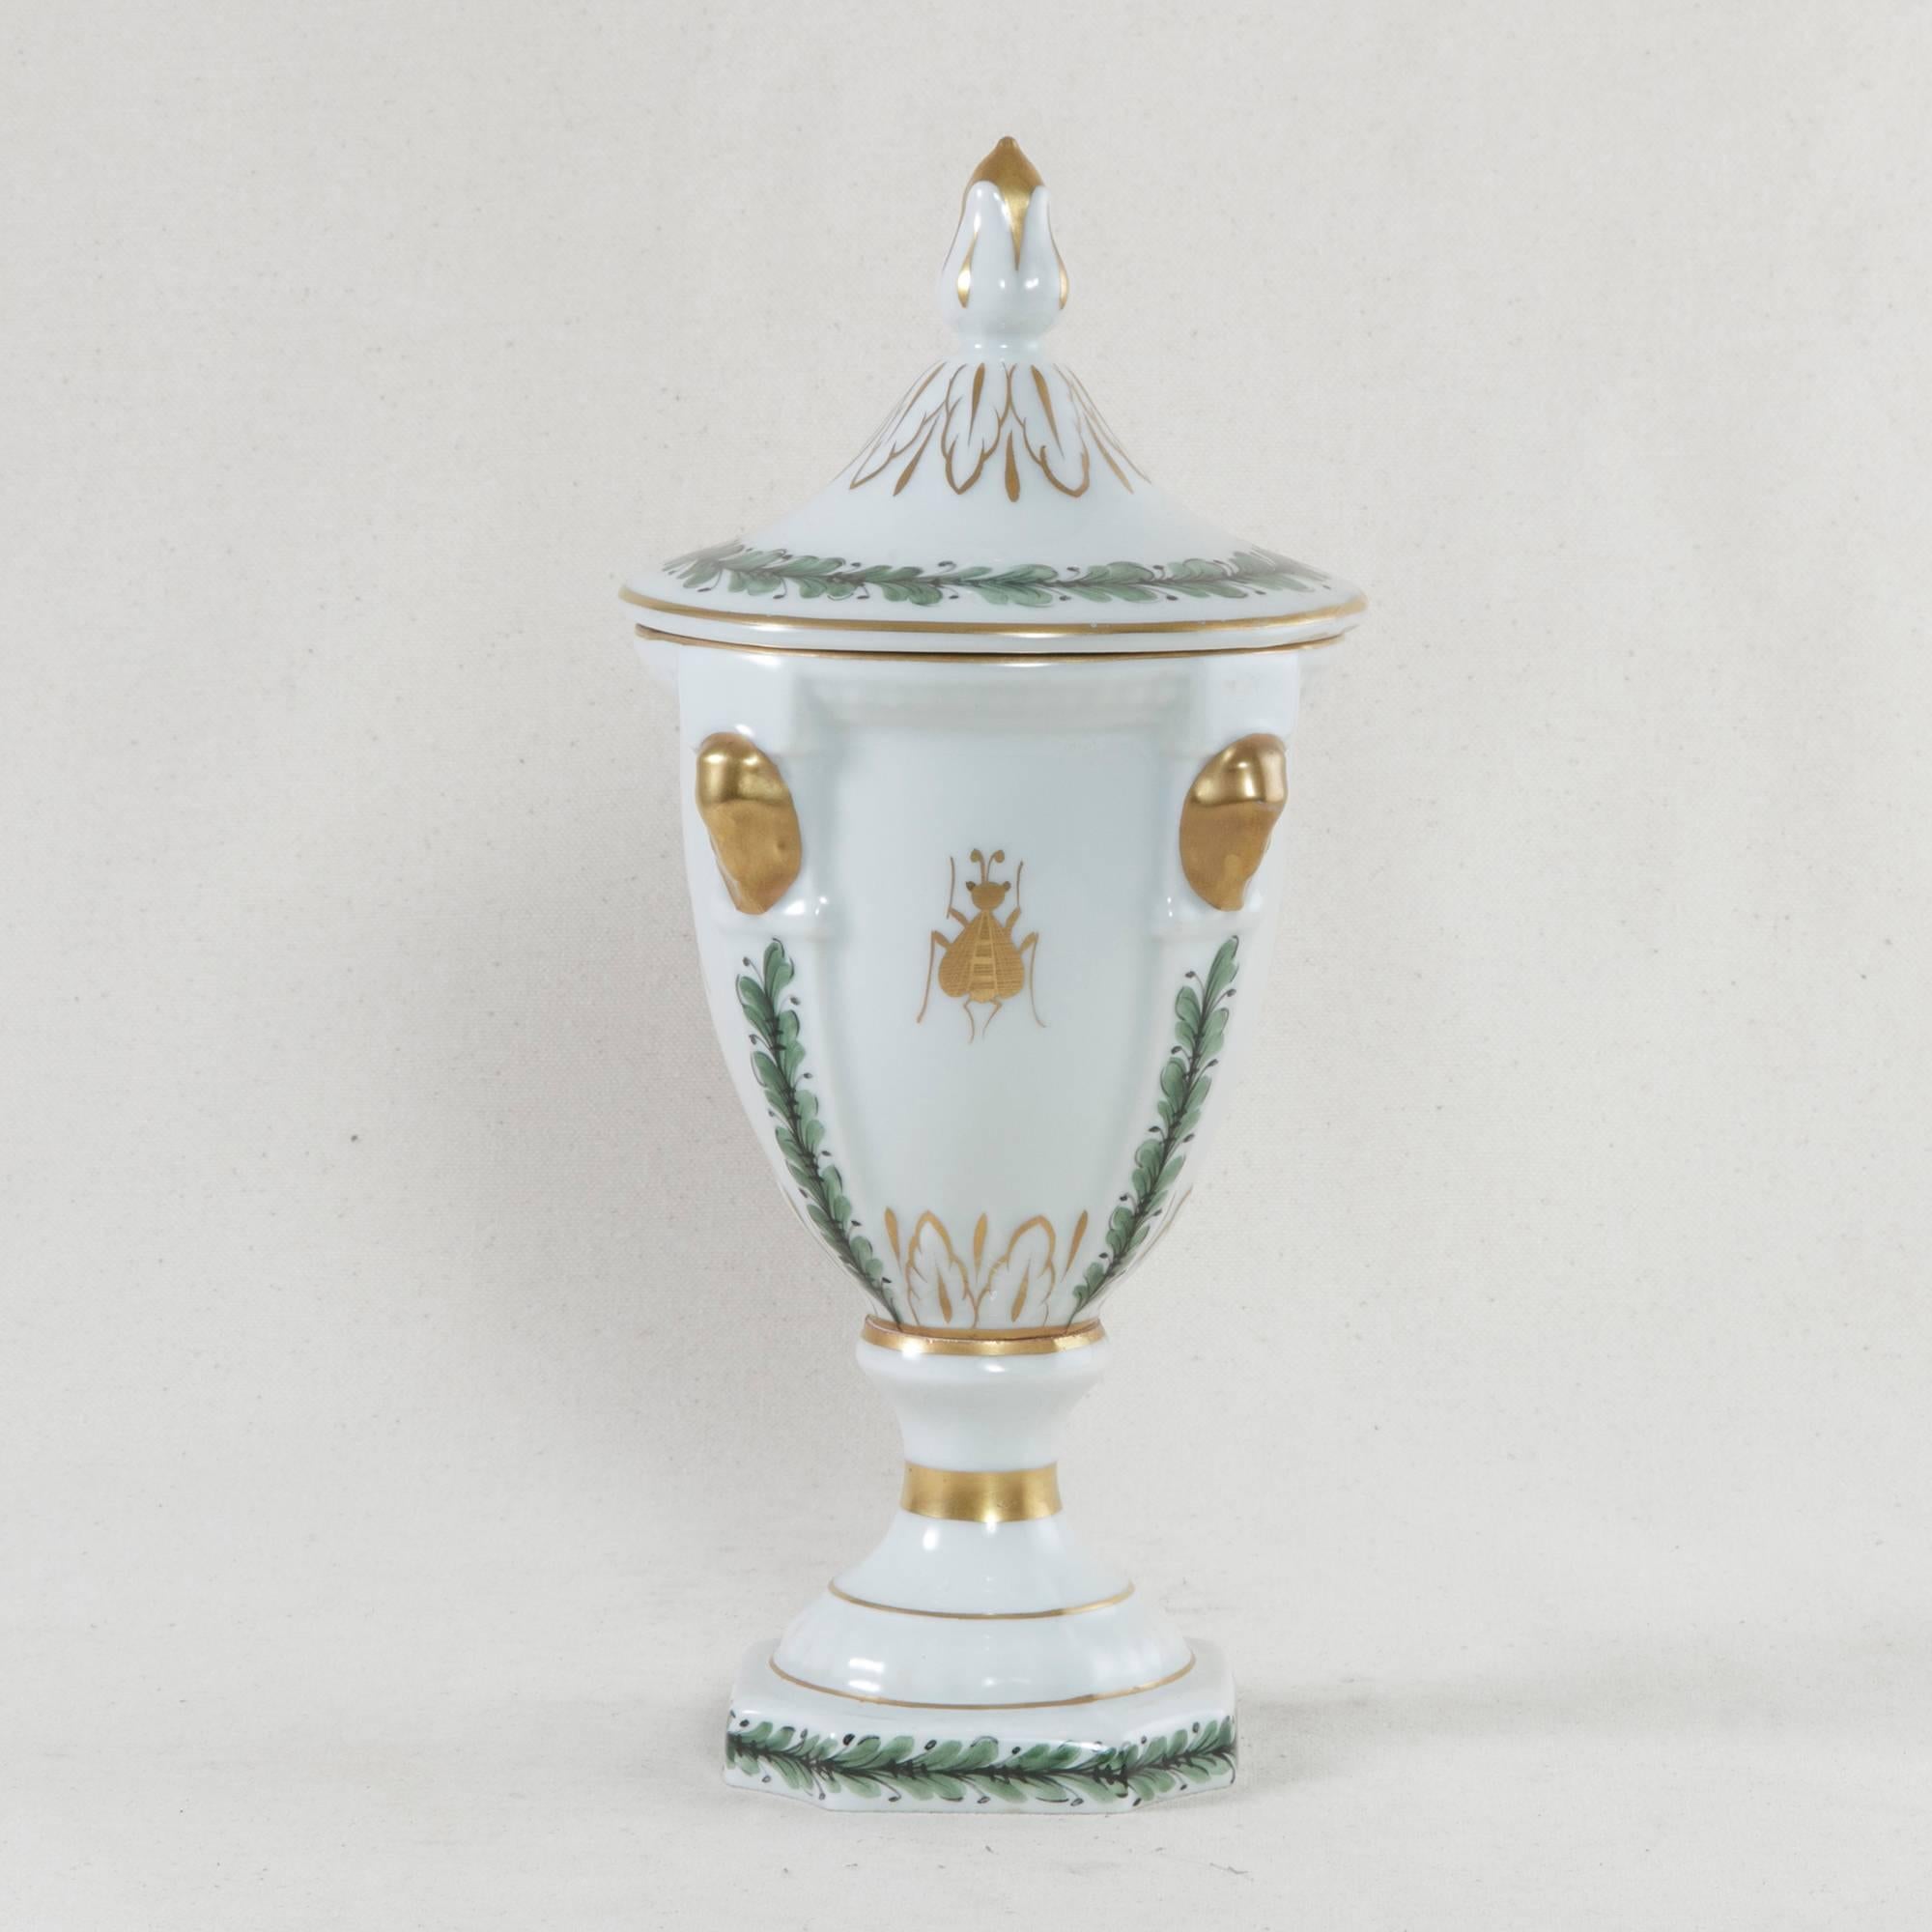 Empire 19th Century French Hand-Painted Porcelain Urn with Lid and Napoleonic Bee Motif